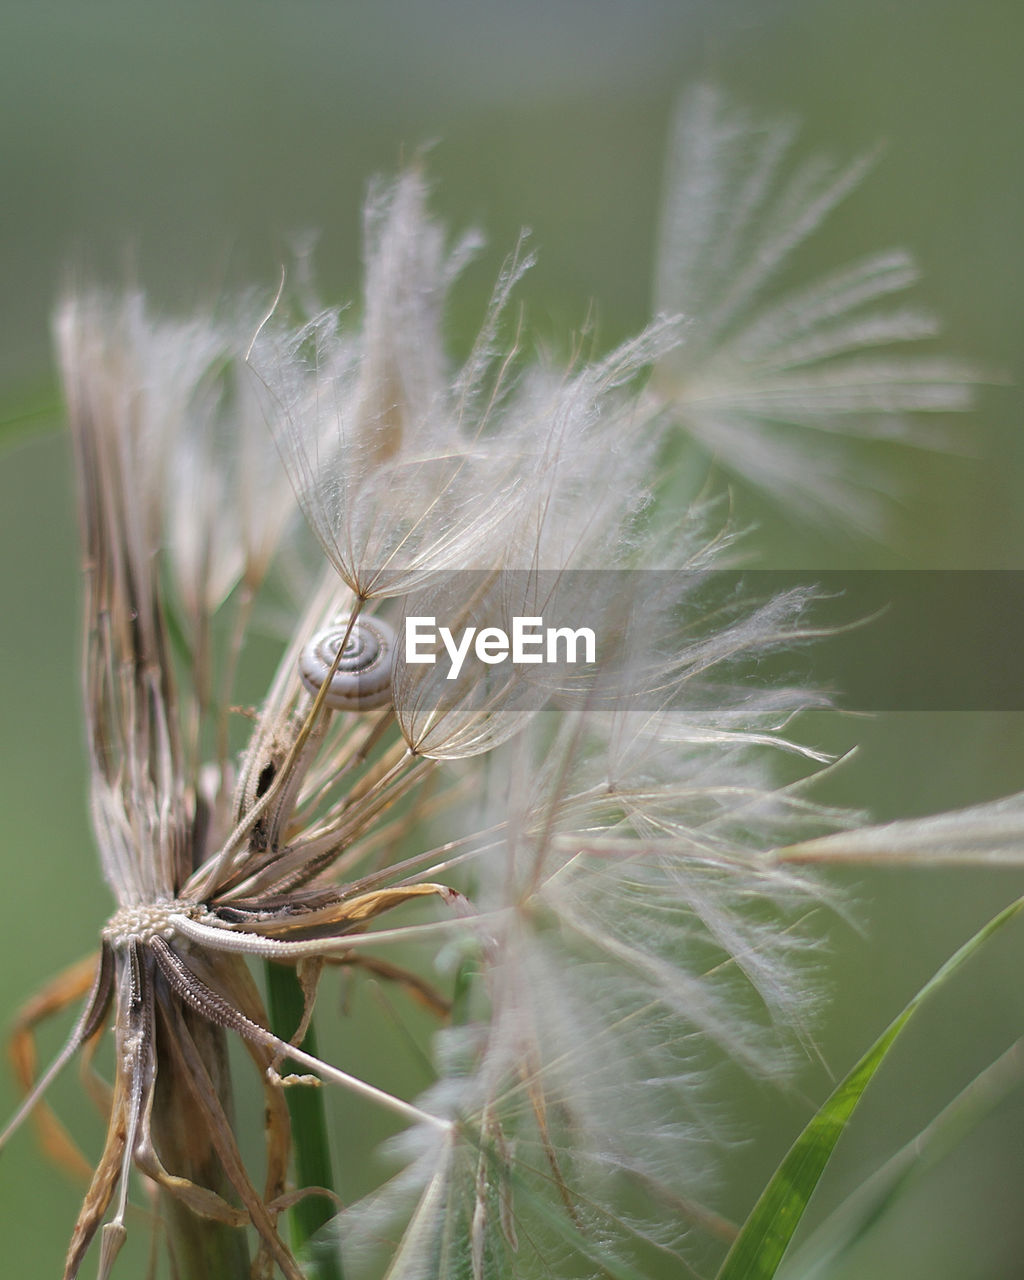 CLOSE-UP OF WHEAT ON PLANT IN THE BACKGROUND